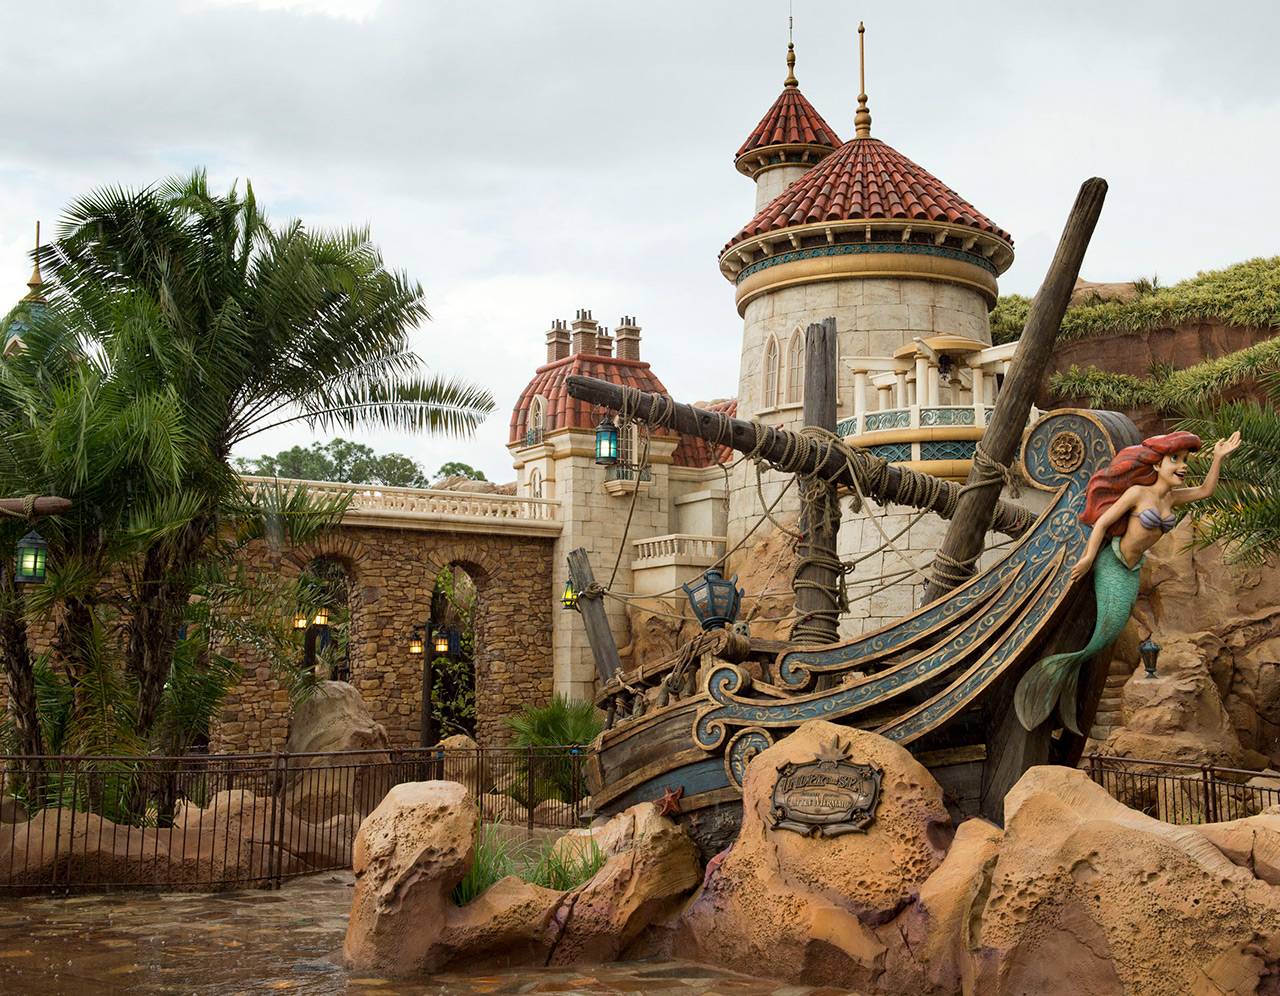 PHOTOS - Disney release new images of new Fantasyland